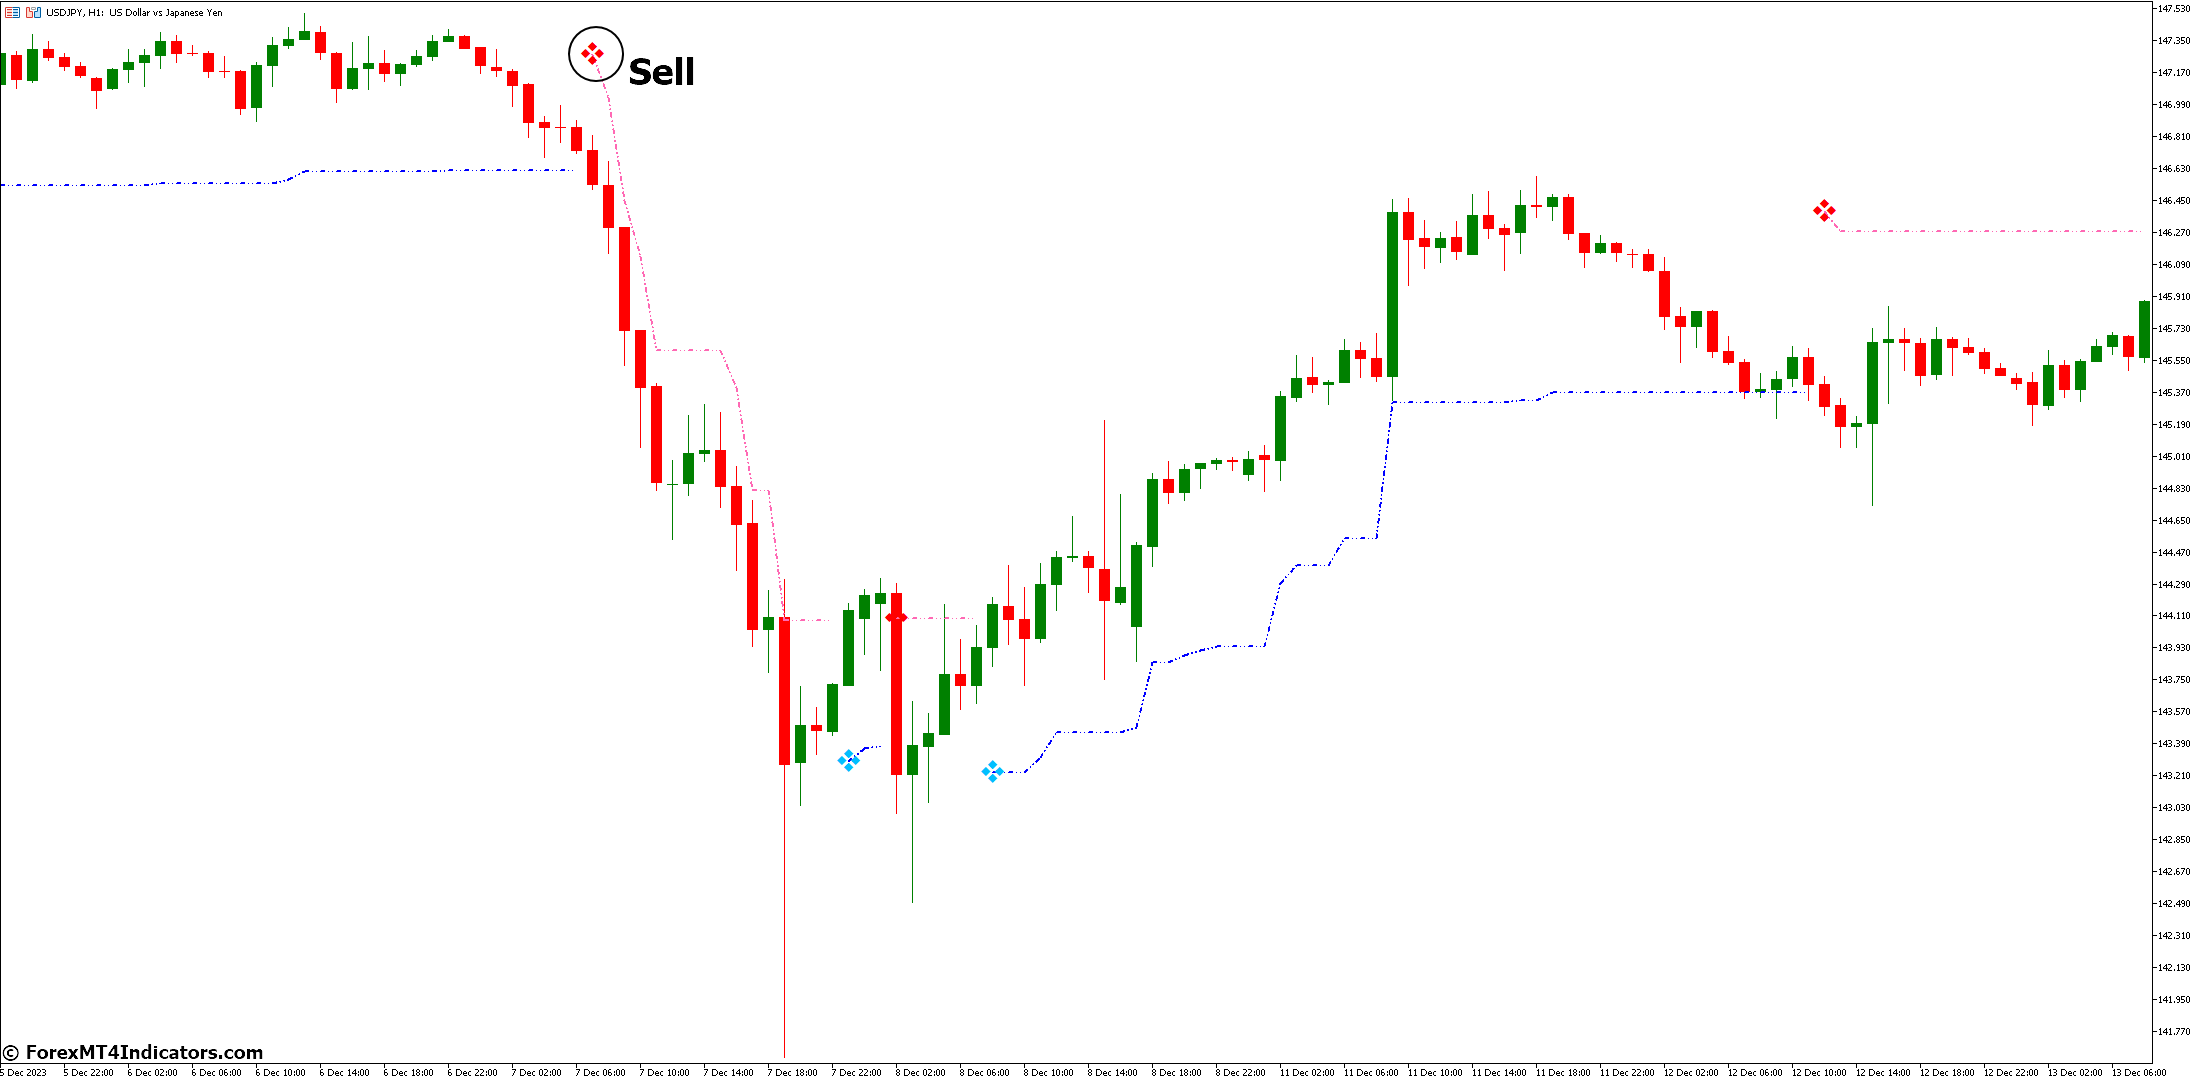 How to Trade with Volatility Pivot Indicator - Sell Entry